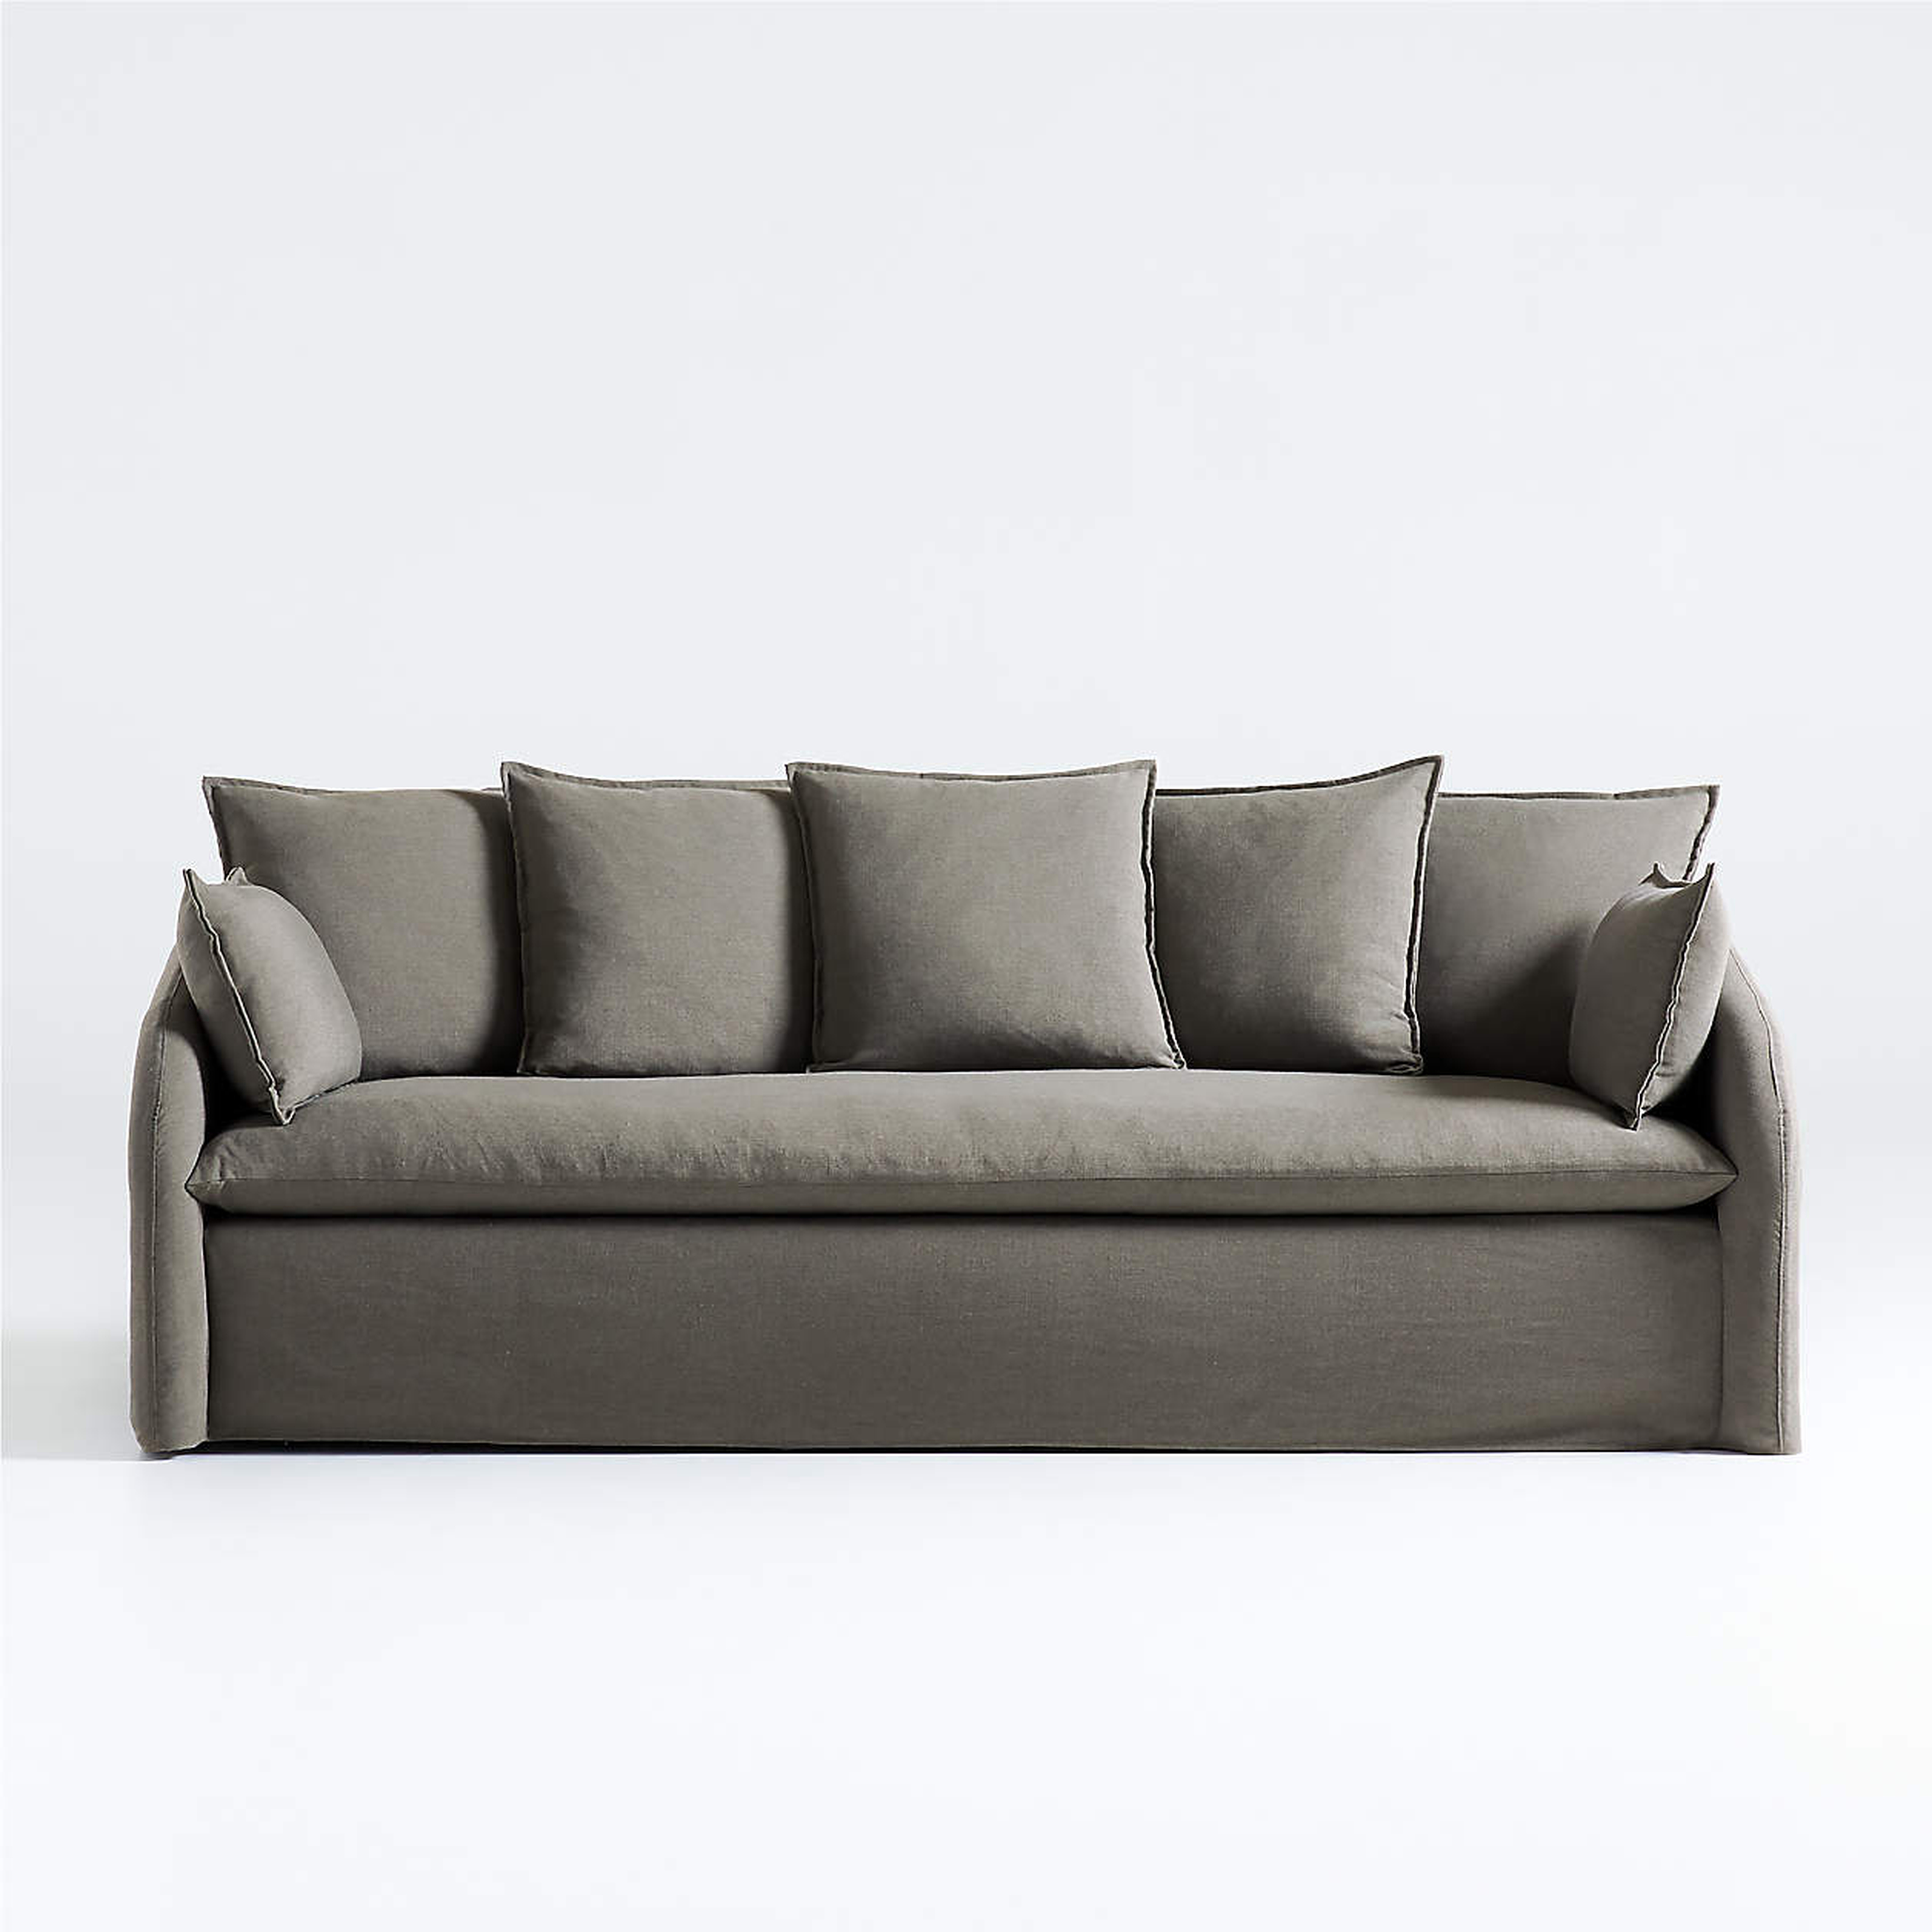 Anza Scatterback Slipcovered Sofa - Crate and Barrel